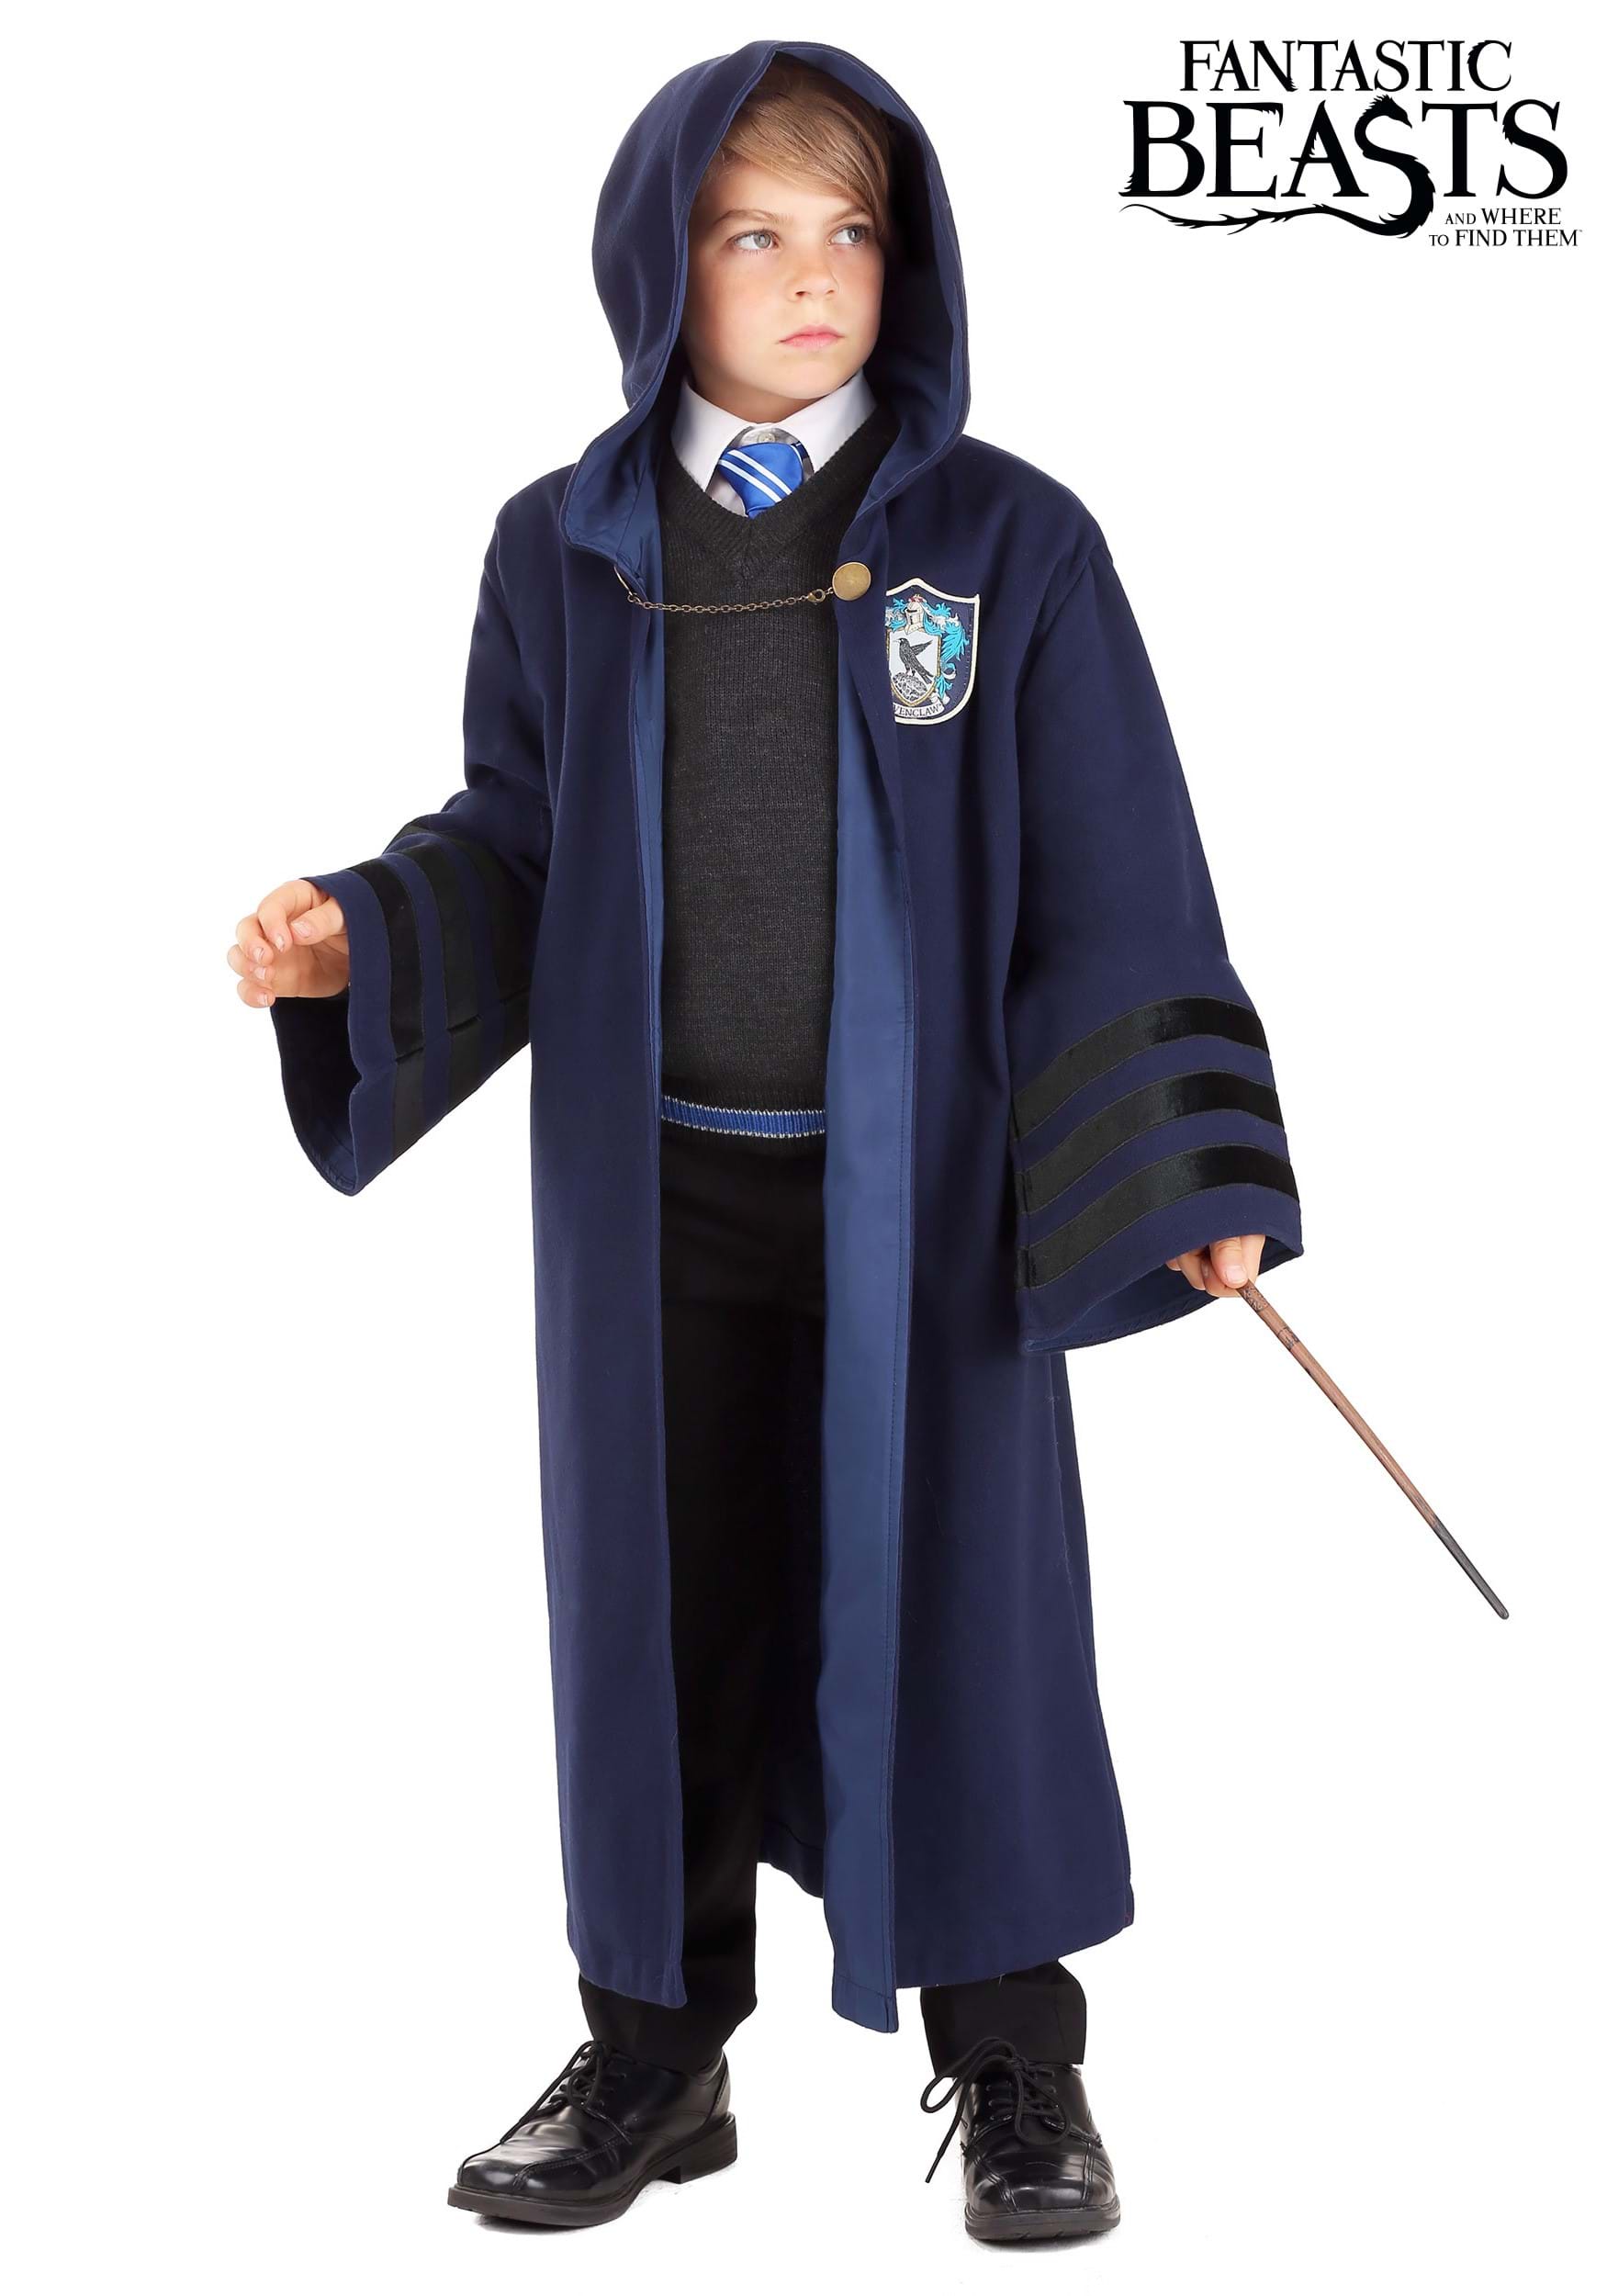 Harry Potter Ravenclaw Robe Adult Costume